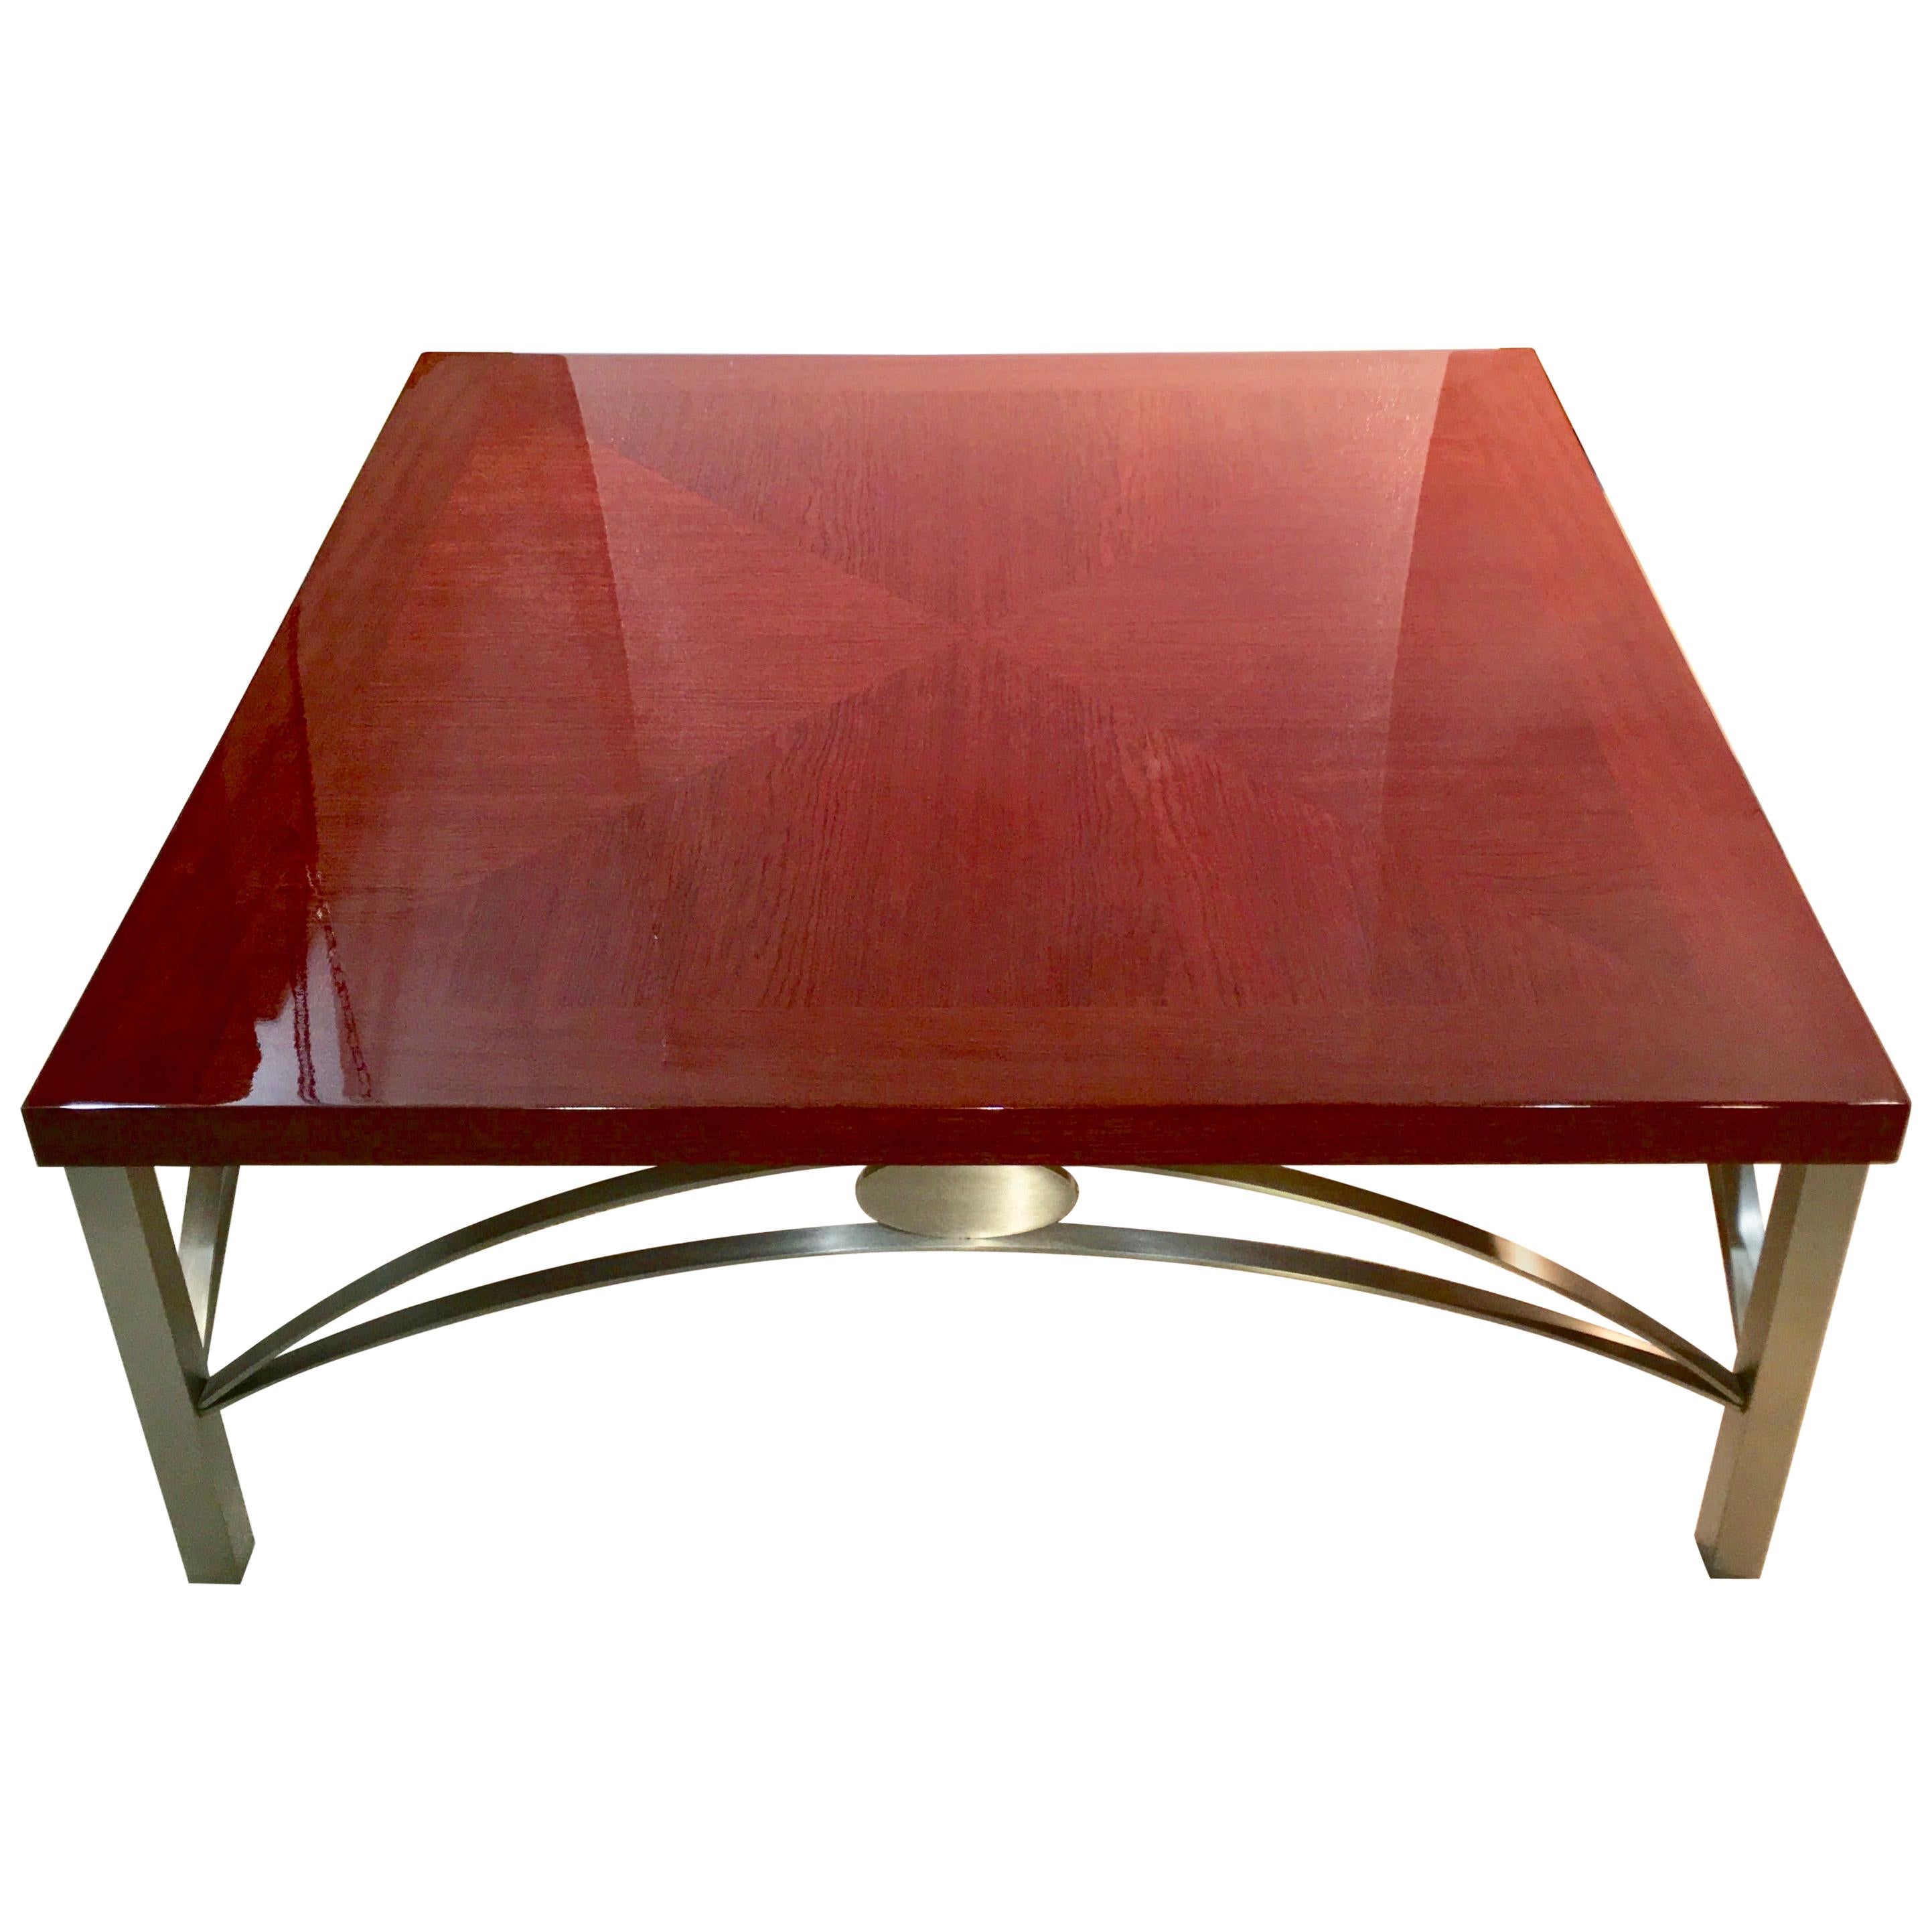 Designer Square Cocktail Table Padauk and Stainless Steel For Sale